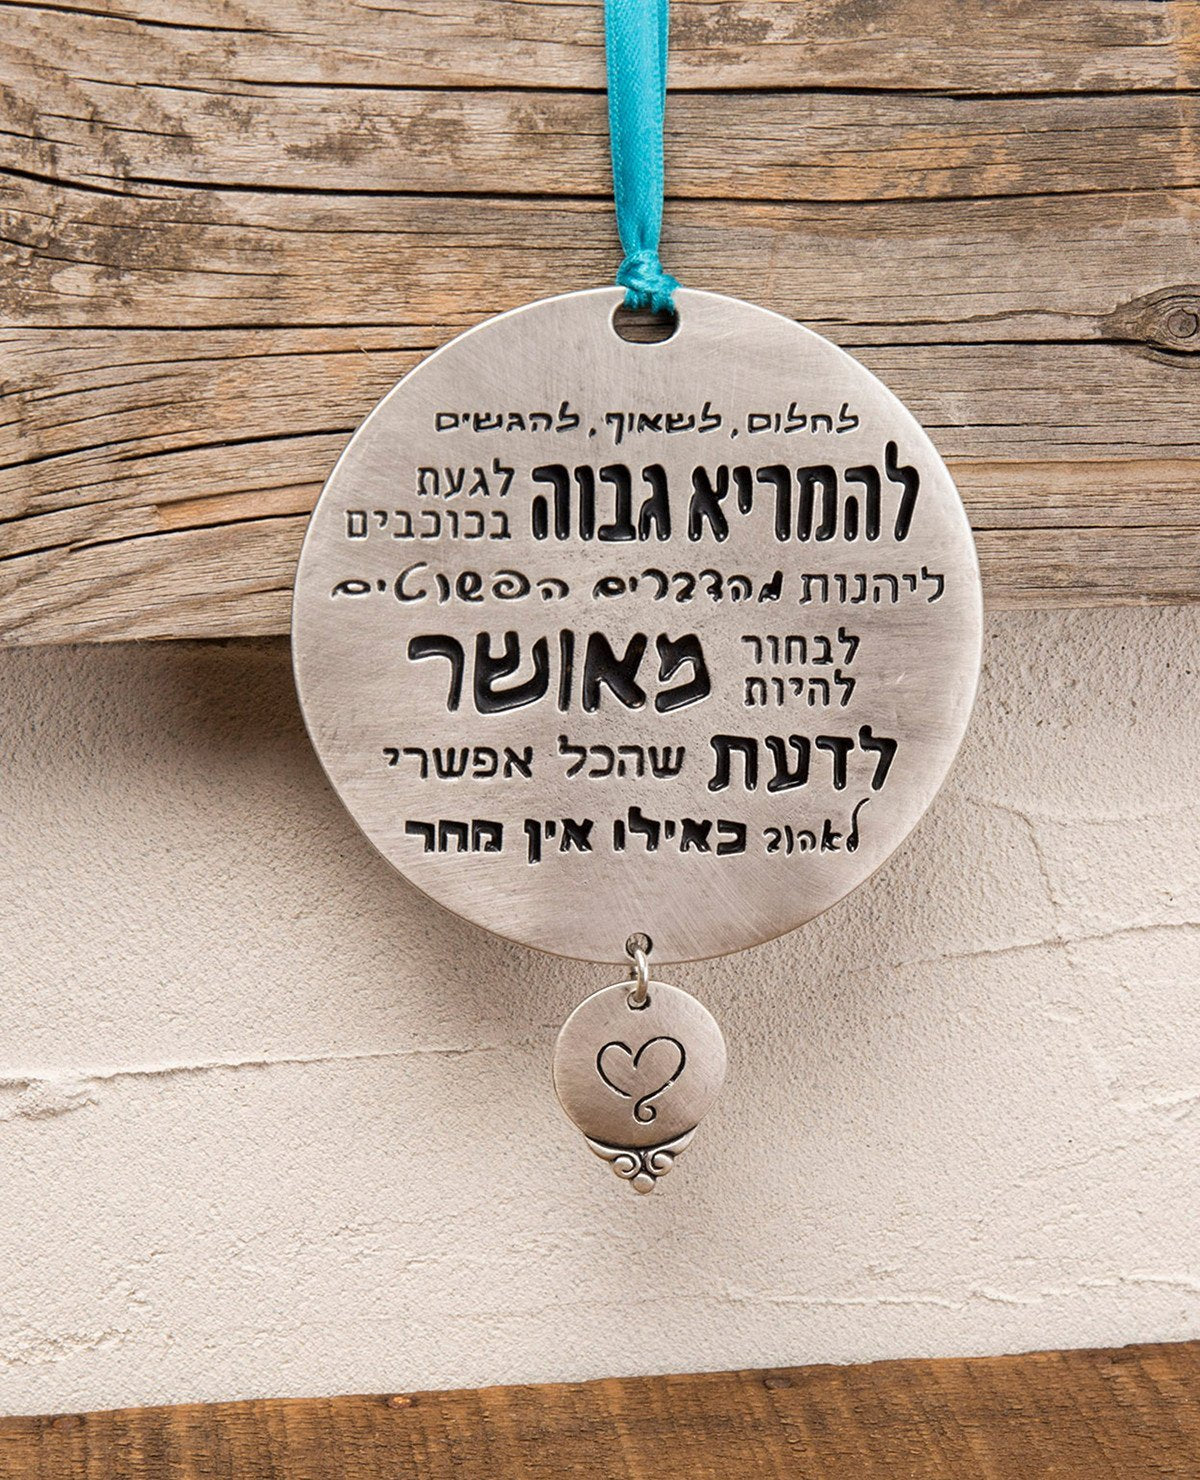 A round hanging wall ornament that reminds us of the truly important things in life! The pendant is coated in sterling silver and has inspirational sentences engraved on it that remind us how it is best to live life: dream, aspire, and fulfill. Makes a great present that warmly embraces anyone you love, when you wish to cheer them up and make them happy, and when you wish to remind them of what is really important. The ornament comes on a turquoise colored ribbon for hanging.  Length: 12 cm  Width: 9 cm